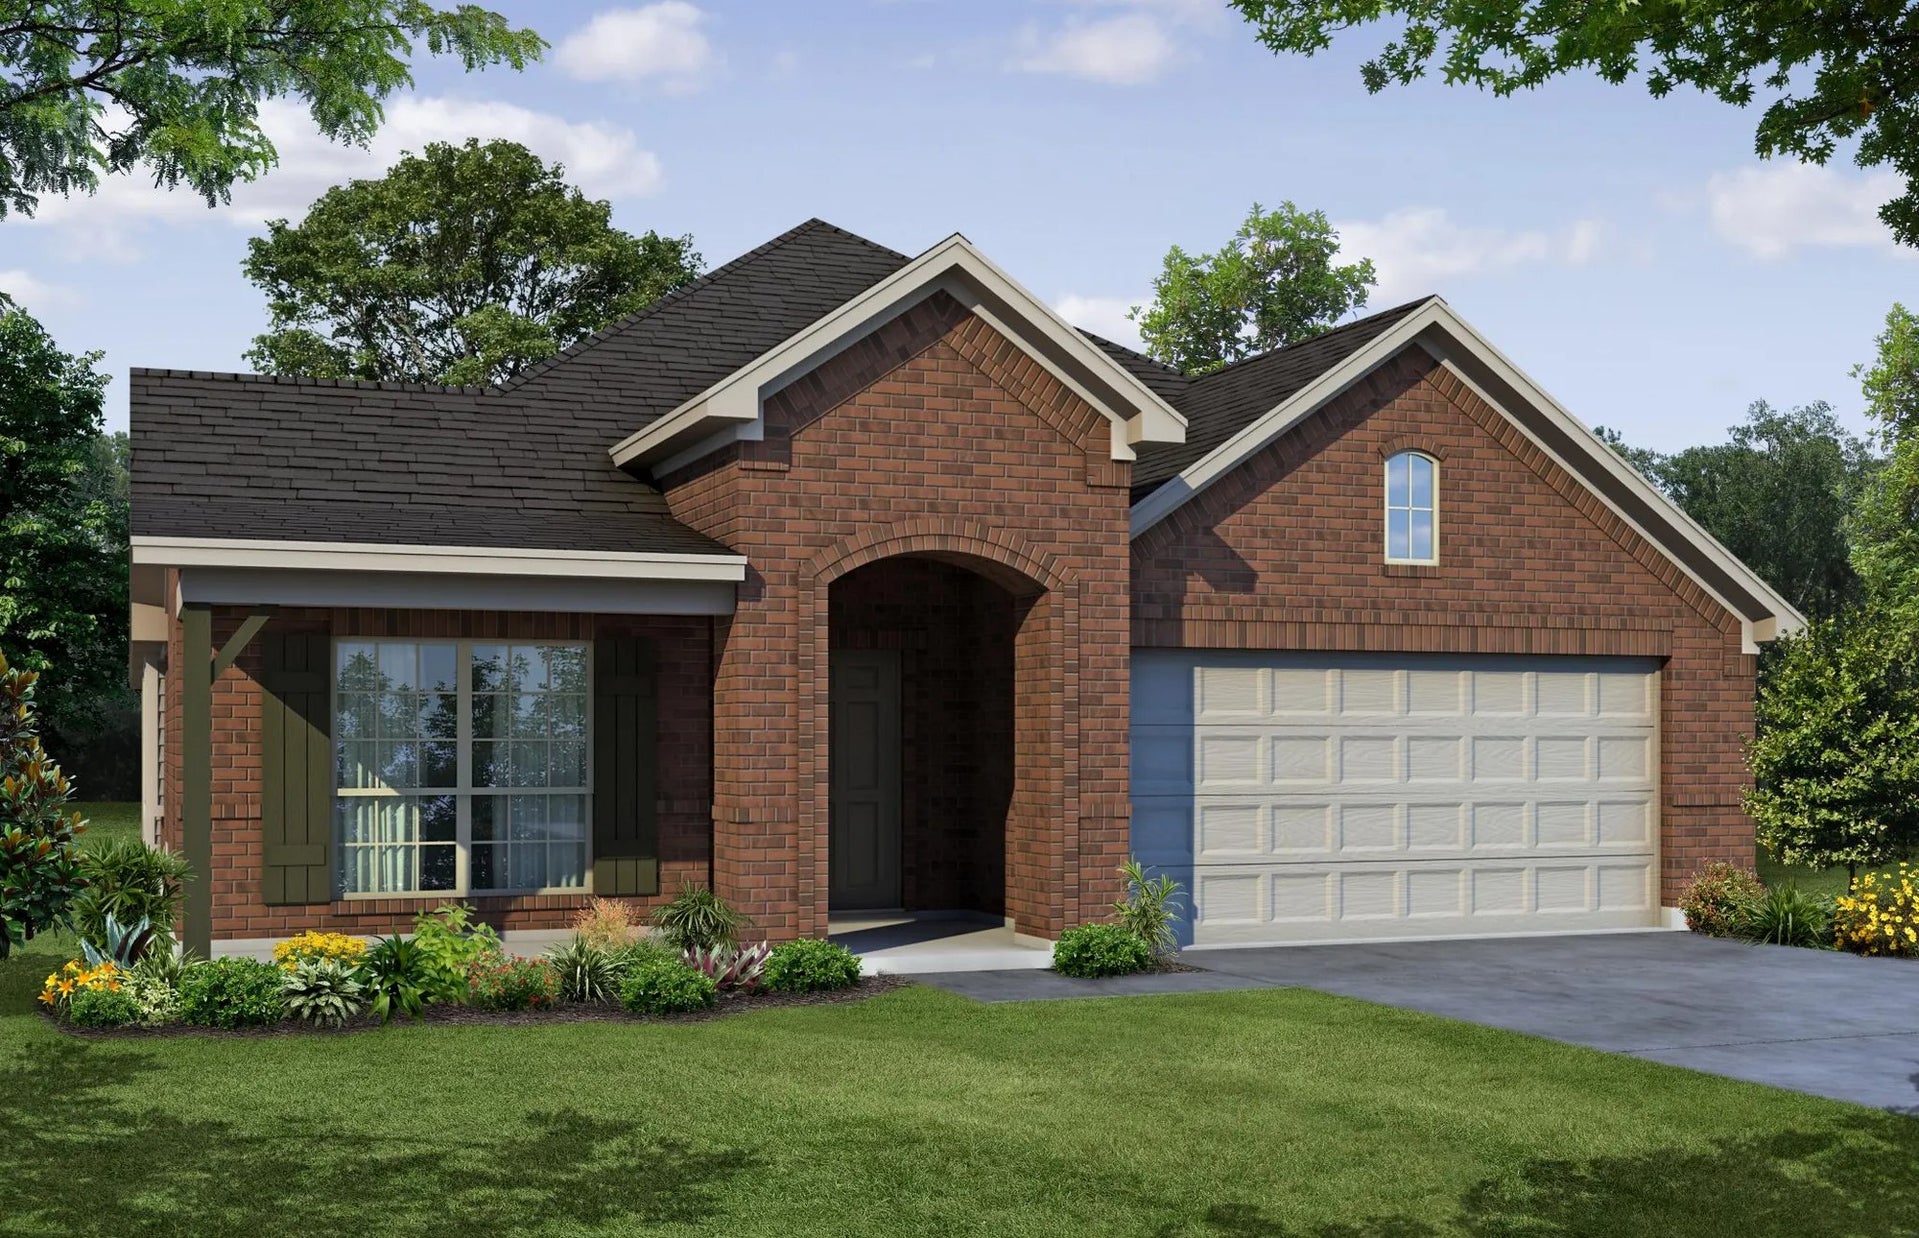 2065 C. 2,065sf New Home in Fort Worth, TX